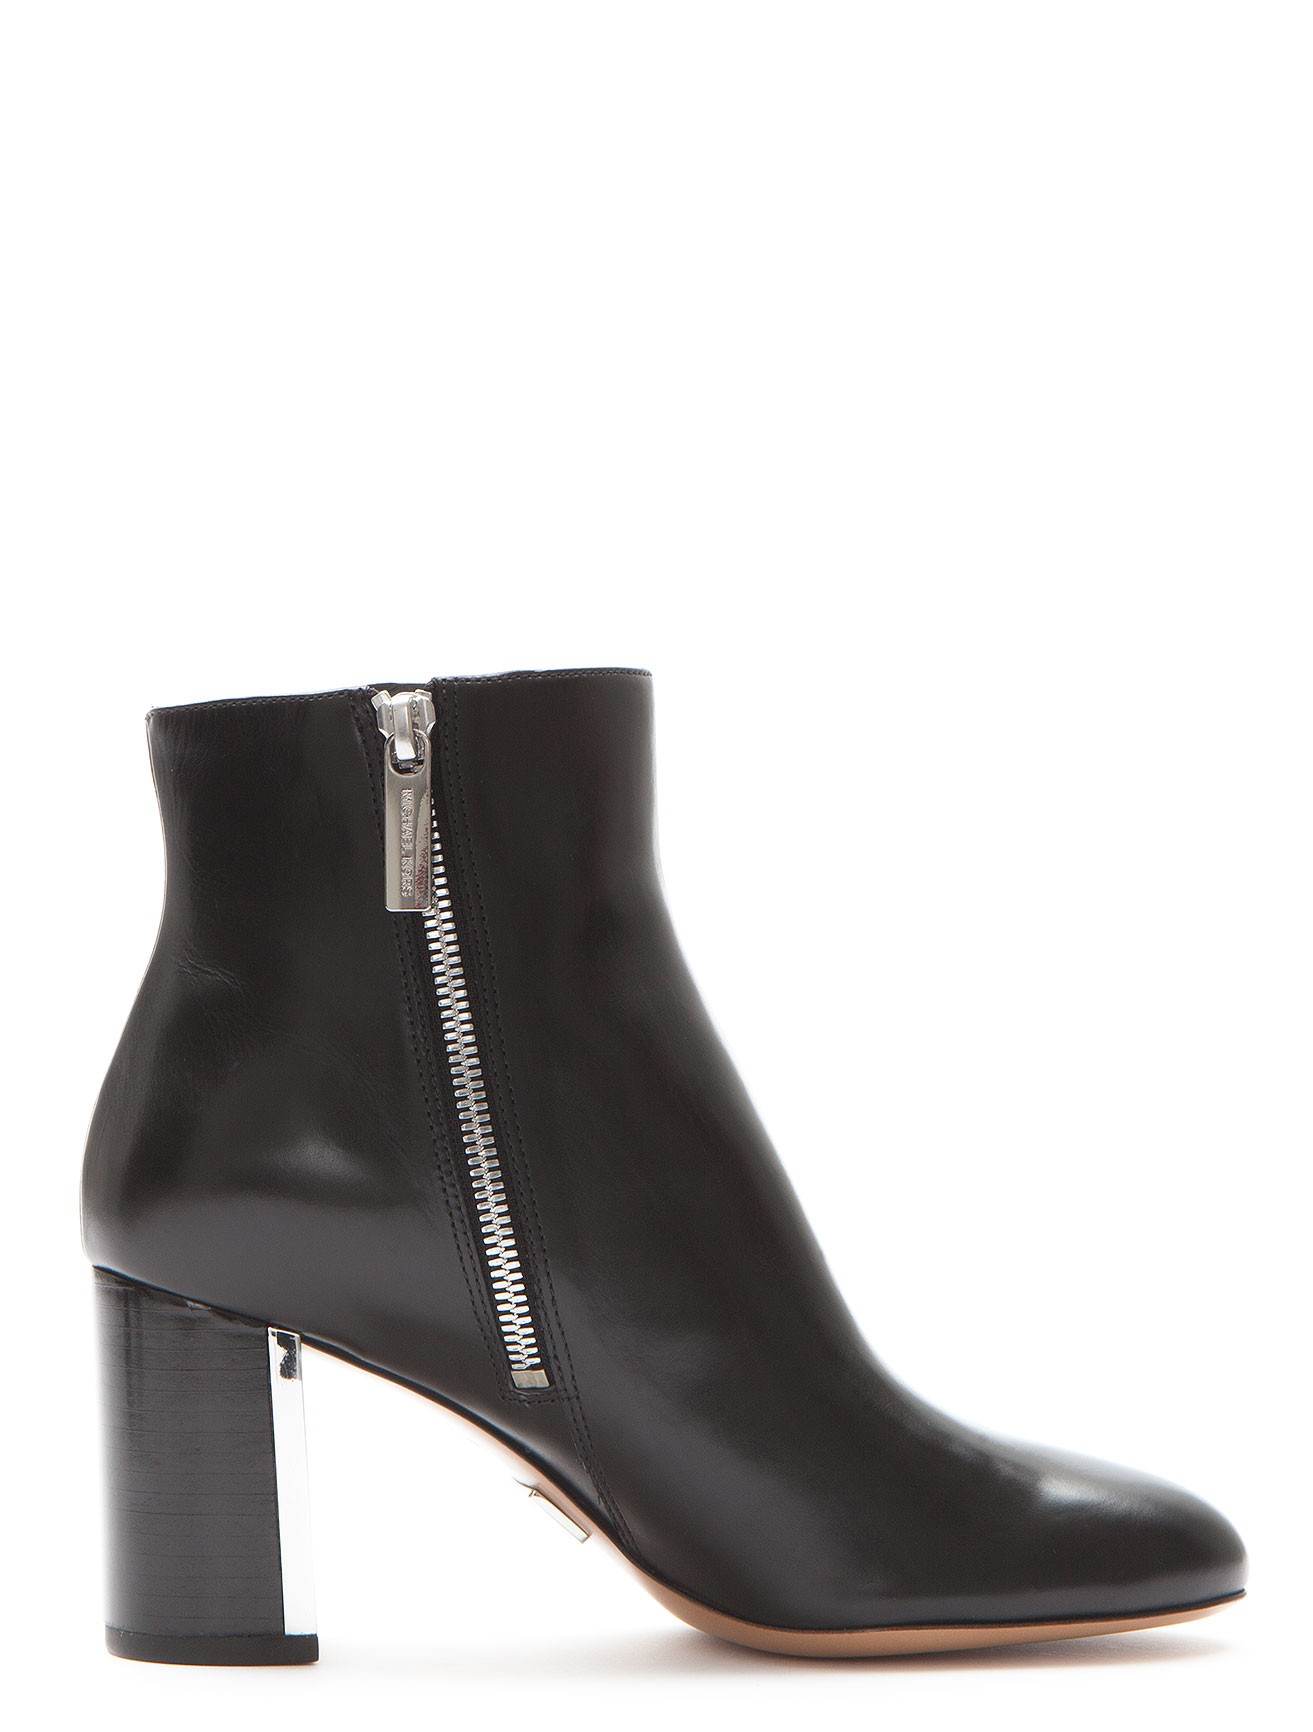 Michael Kors Vivi Leather Ankle Boots in Black | Lyst